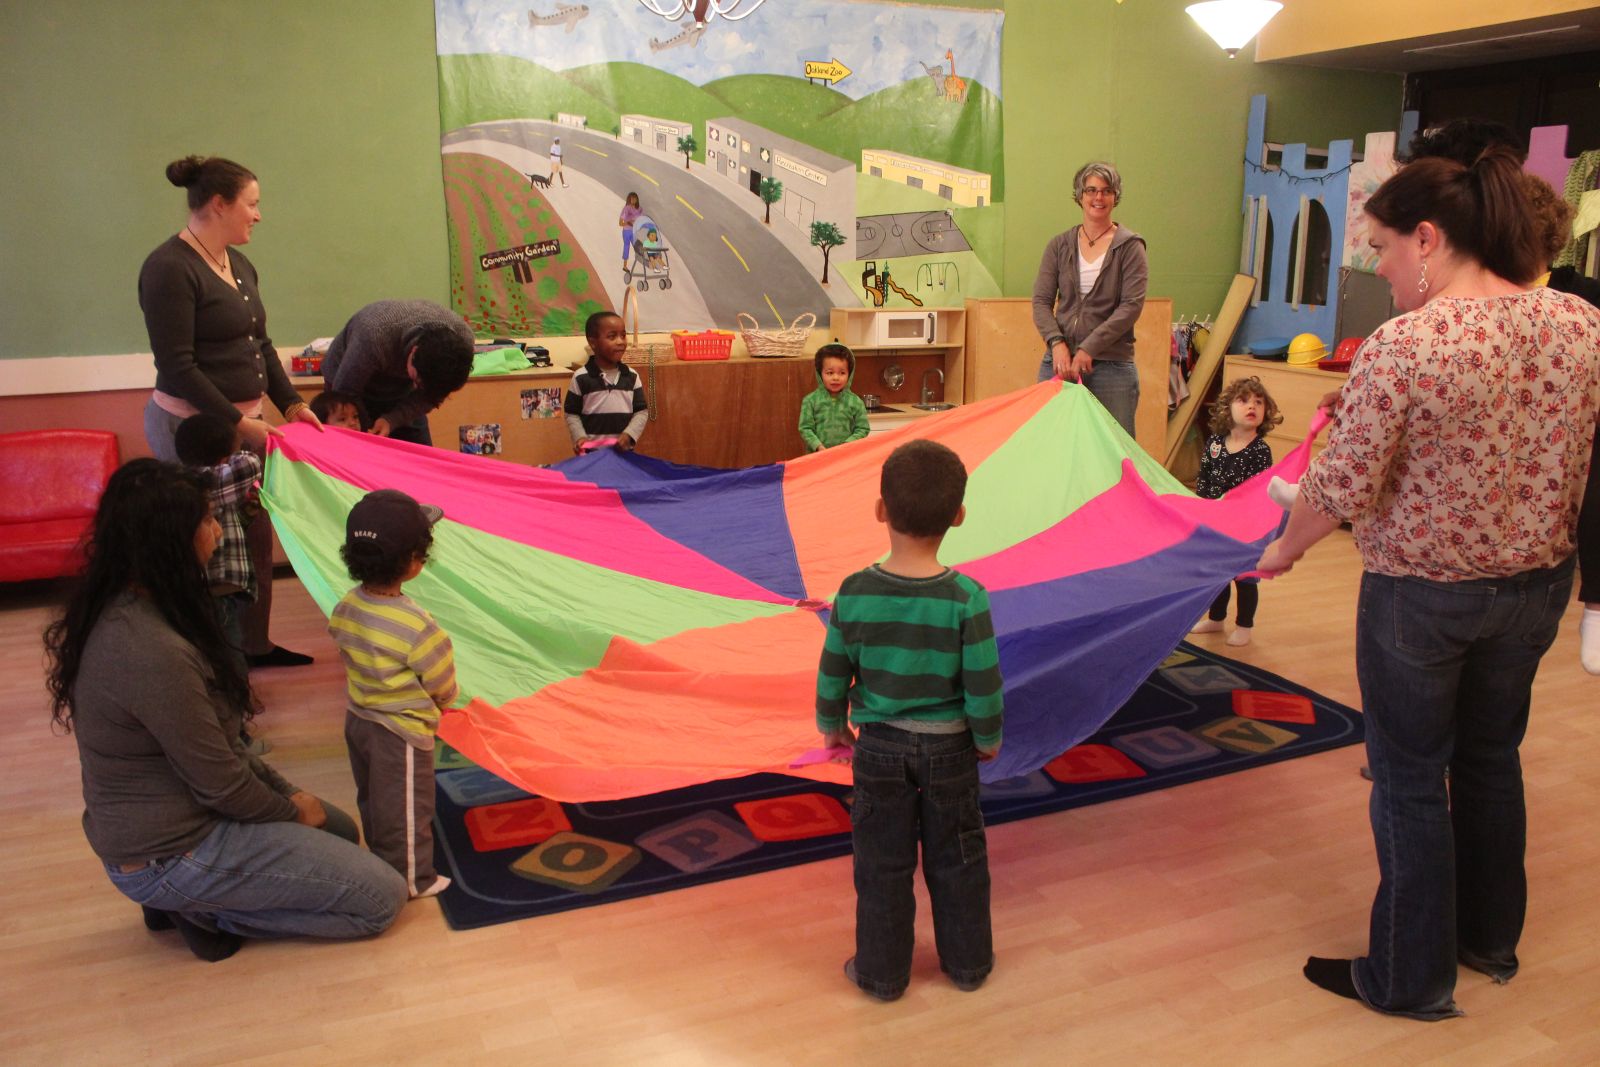 A diverse group of young children and their care givers hold up a big, colorful parachute. They are in a play space complete with a castle, a painting of a parent walking down the street with a baby in a stroller, and an alphabet rug.